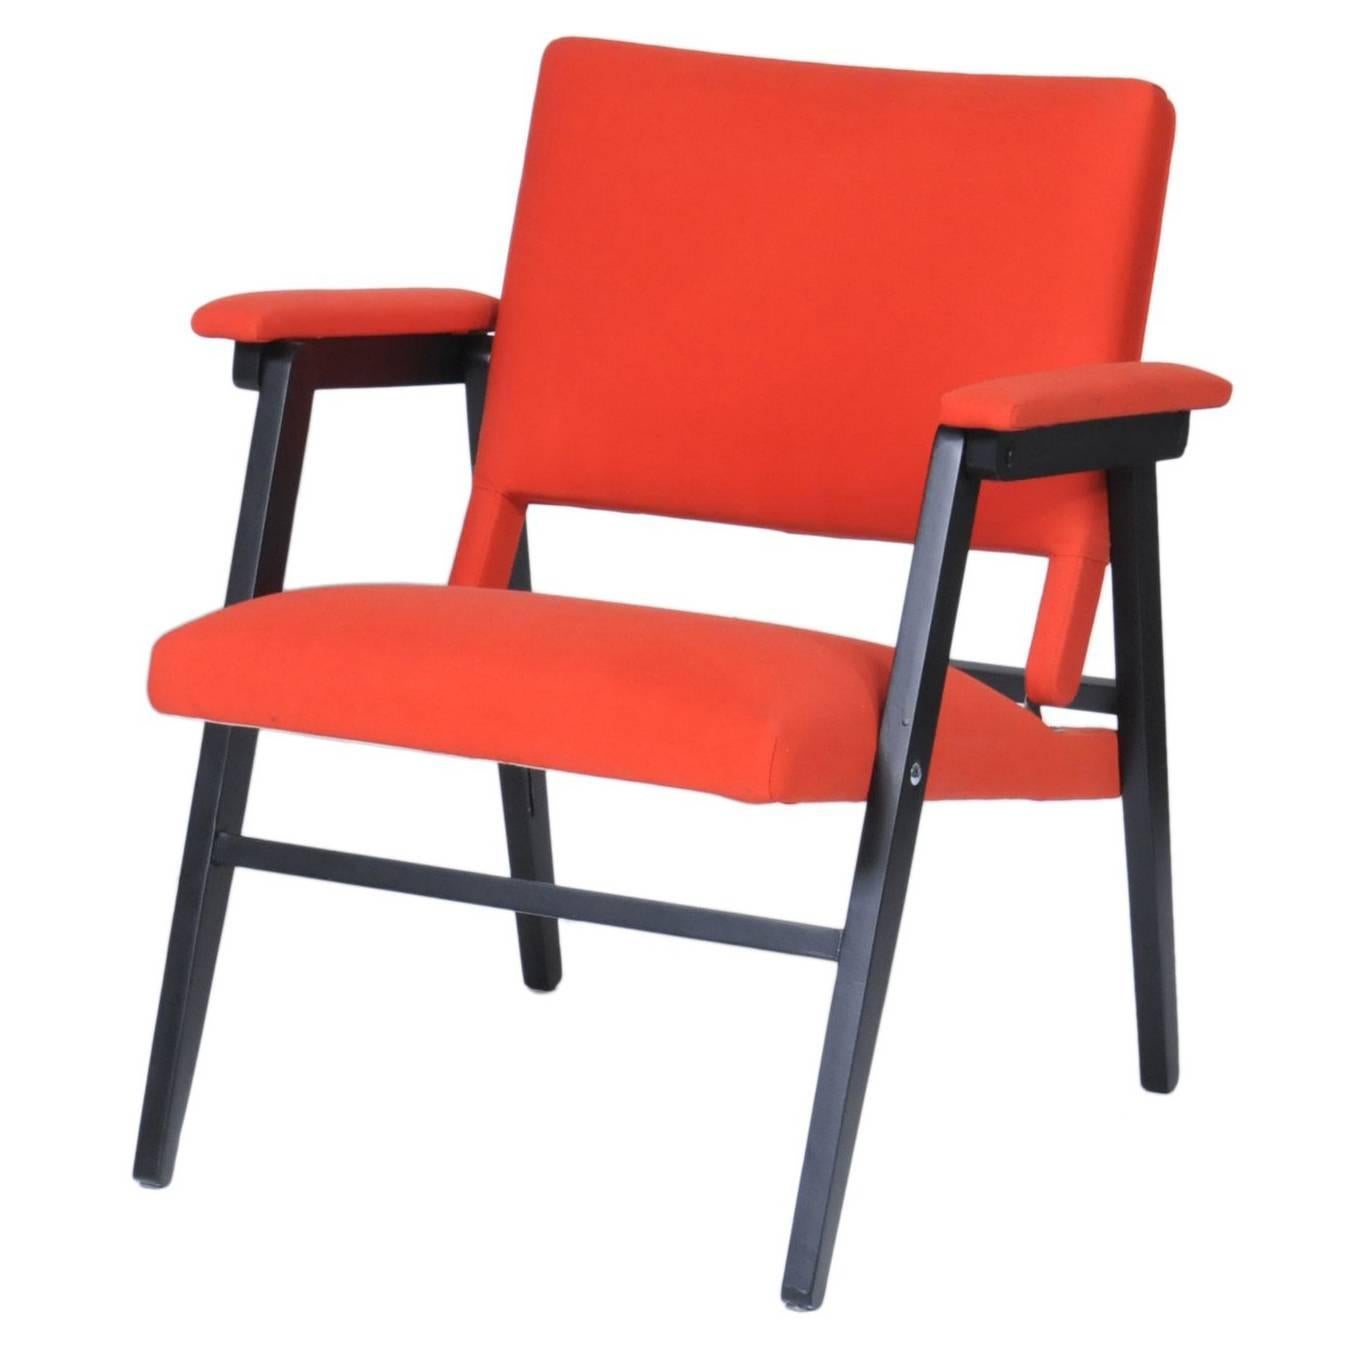 Midcentury Brazilian Folding Chair by unknown author, 1950s